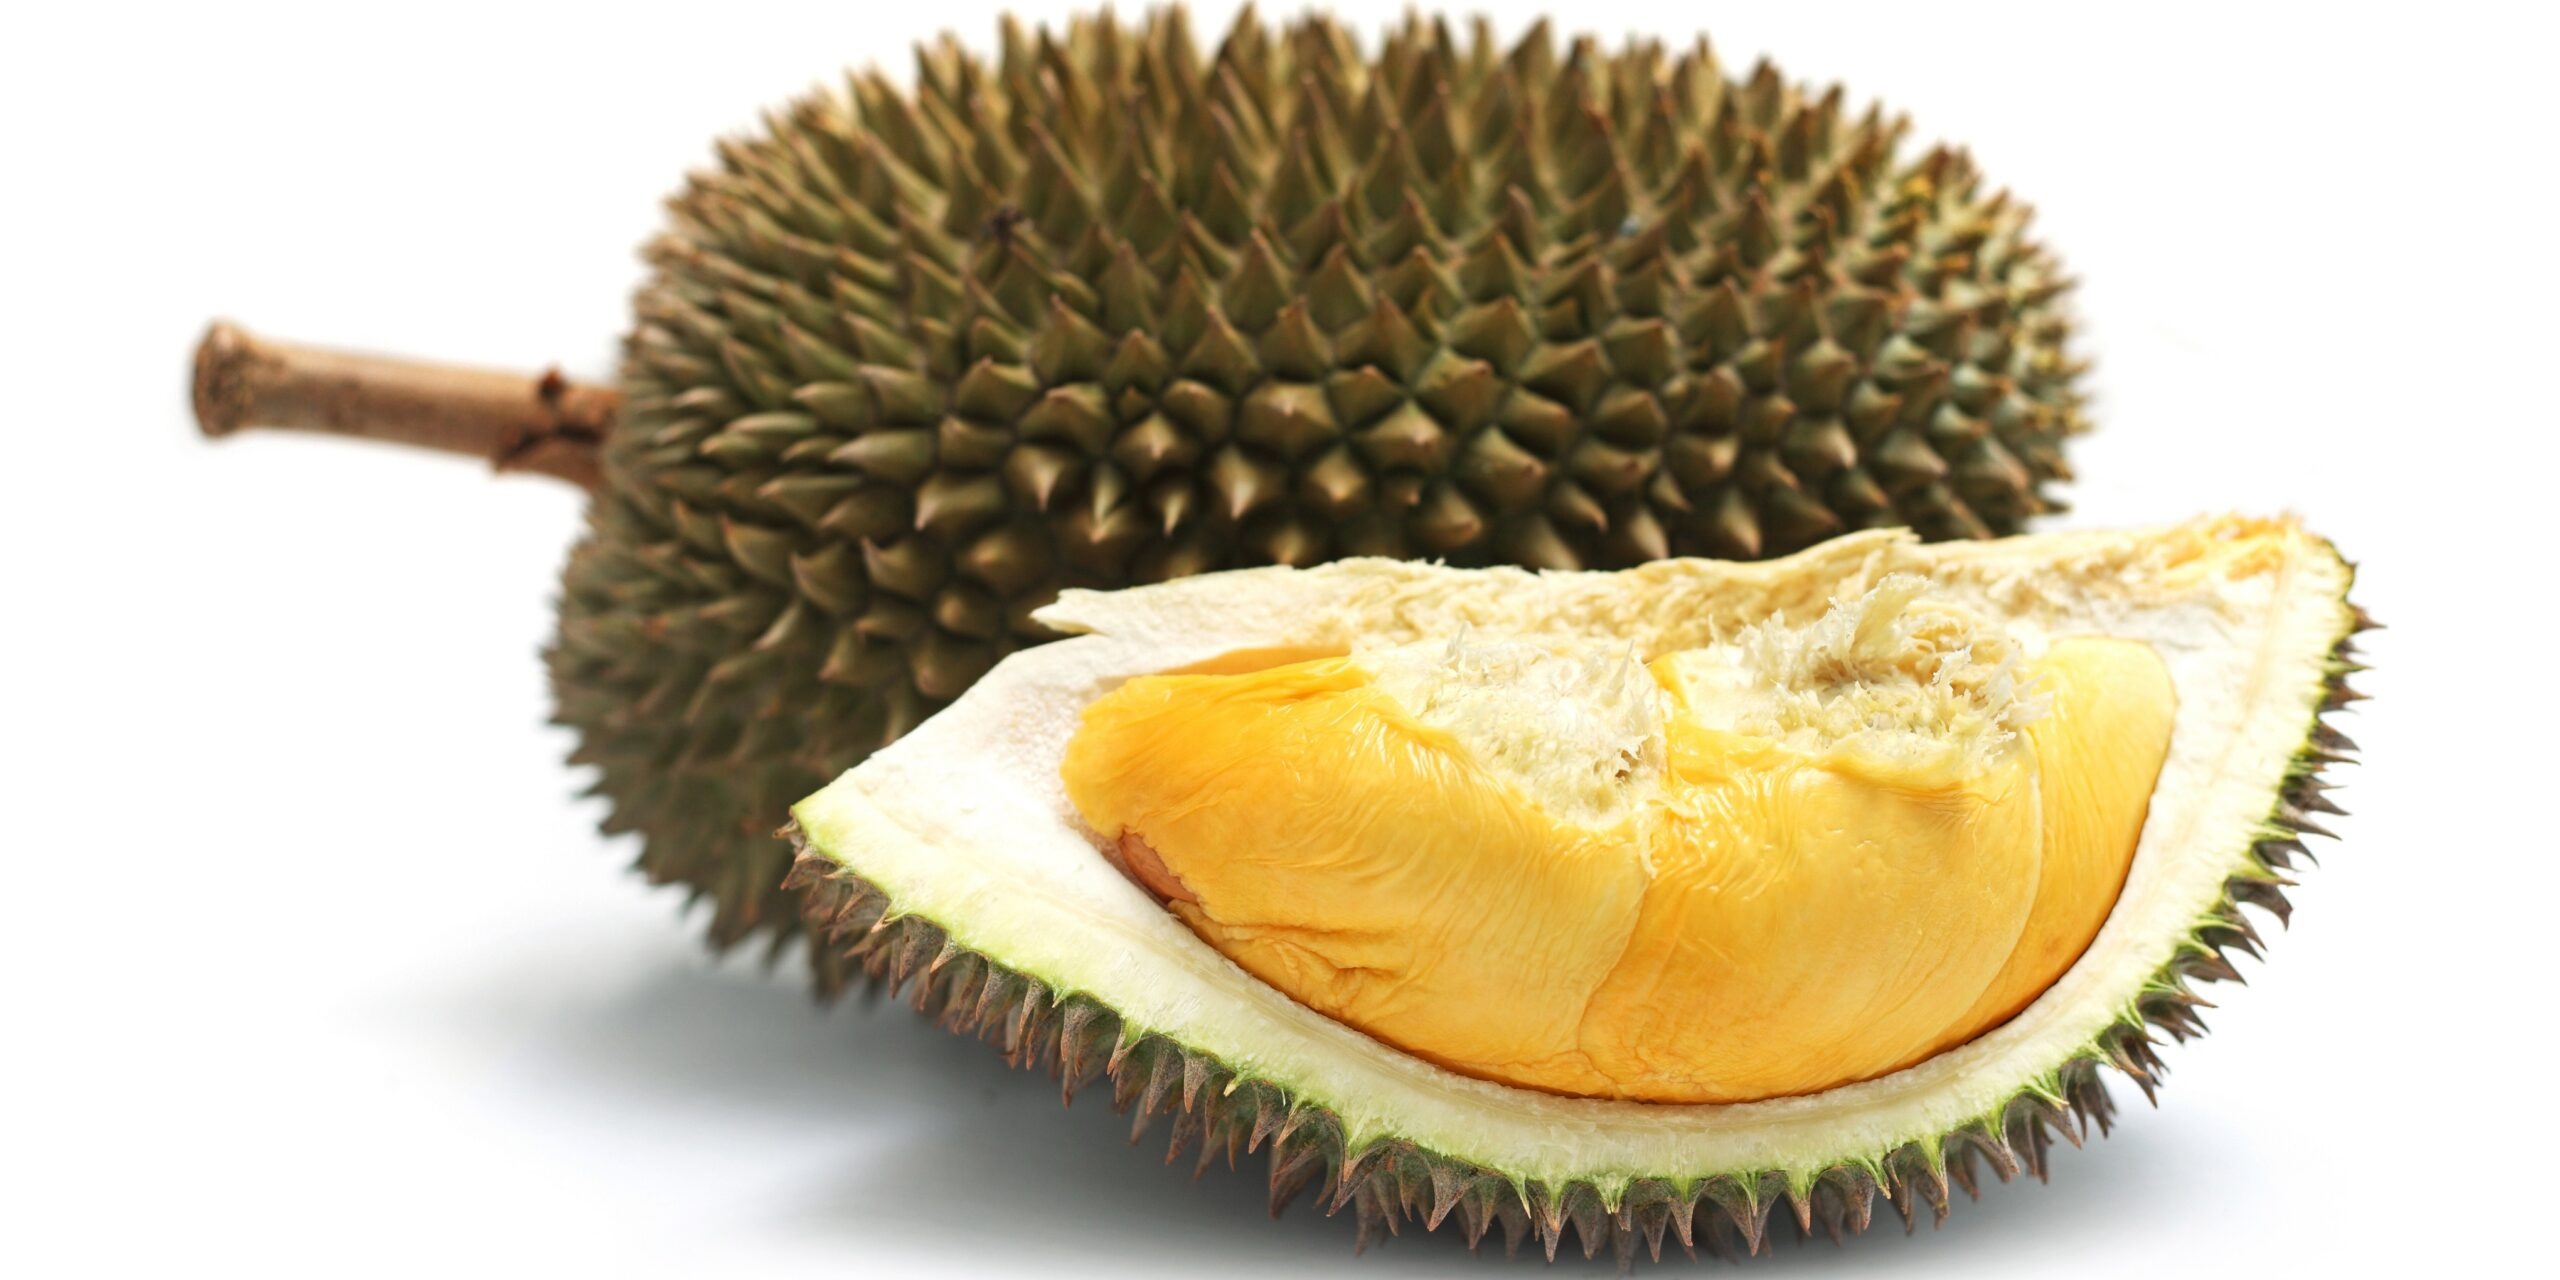 Durian: Nine species are used in human diet, Divine taste and horrible smell. 2560x1280 Dual Screen Wallpaper.